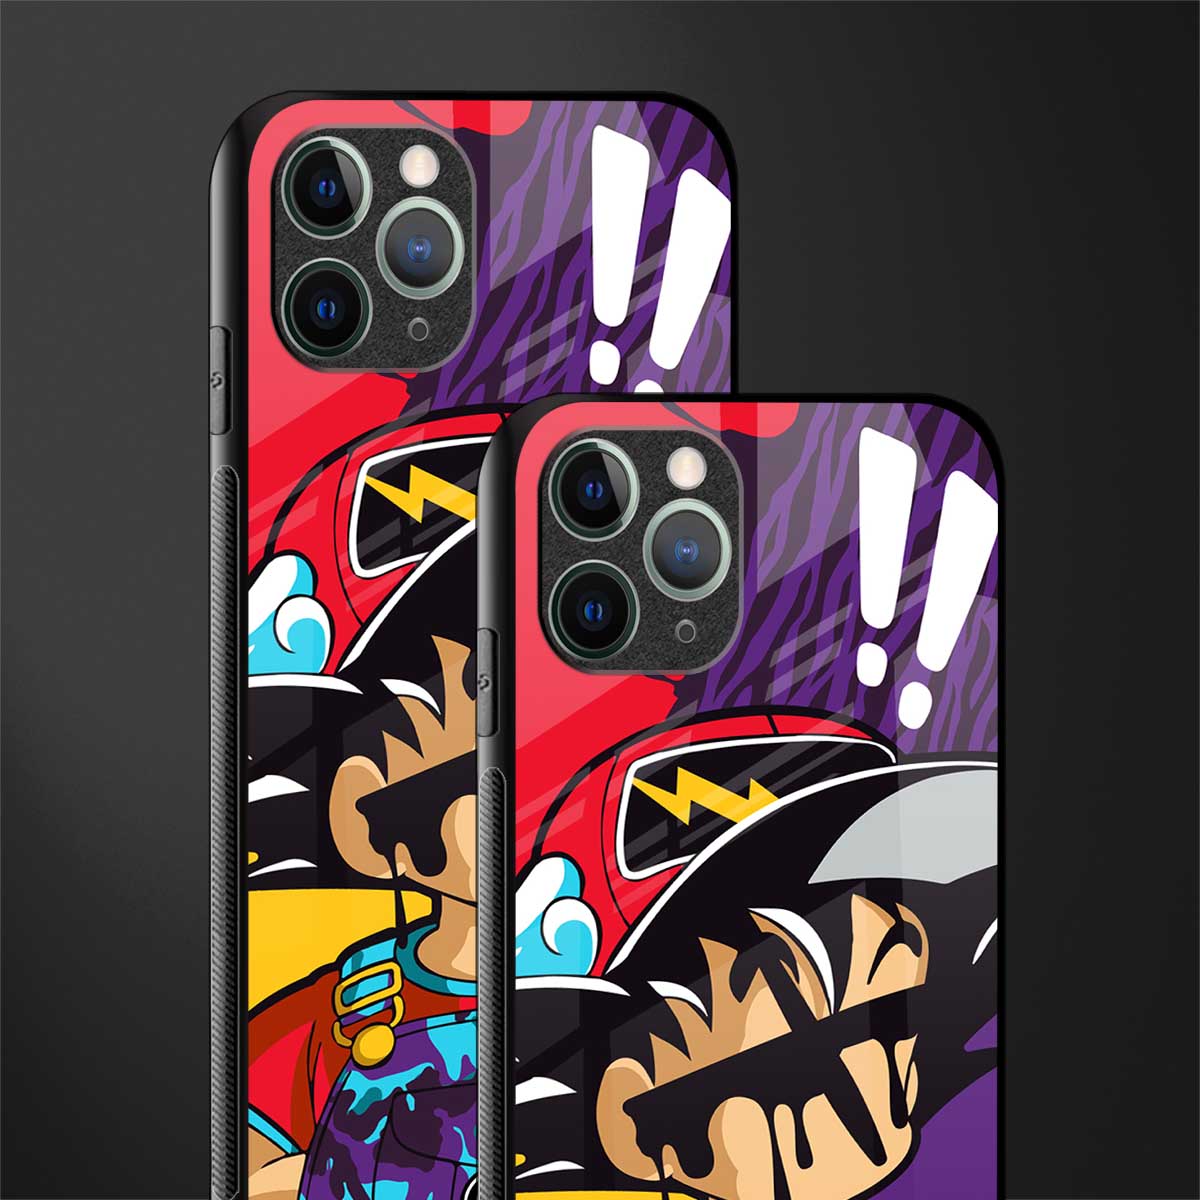 dragon ball z art phone cover for iphone 11 pro